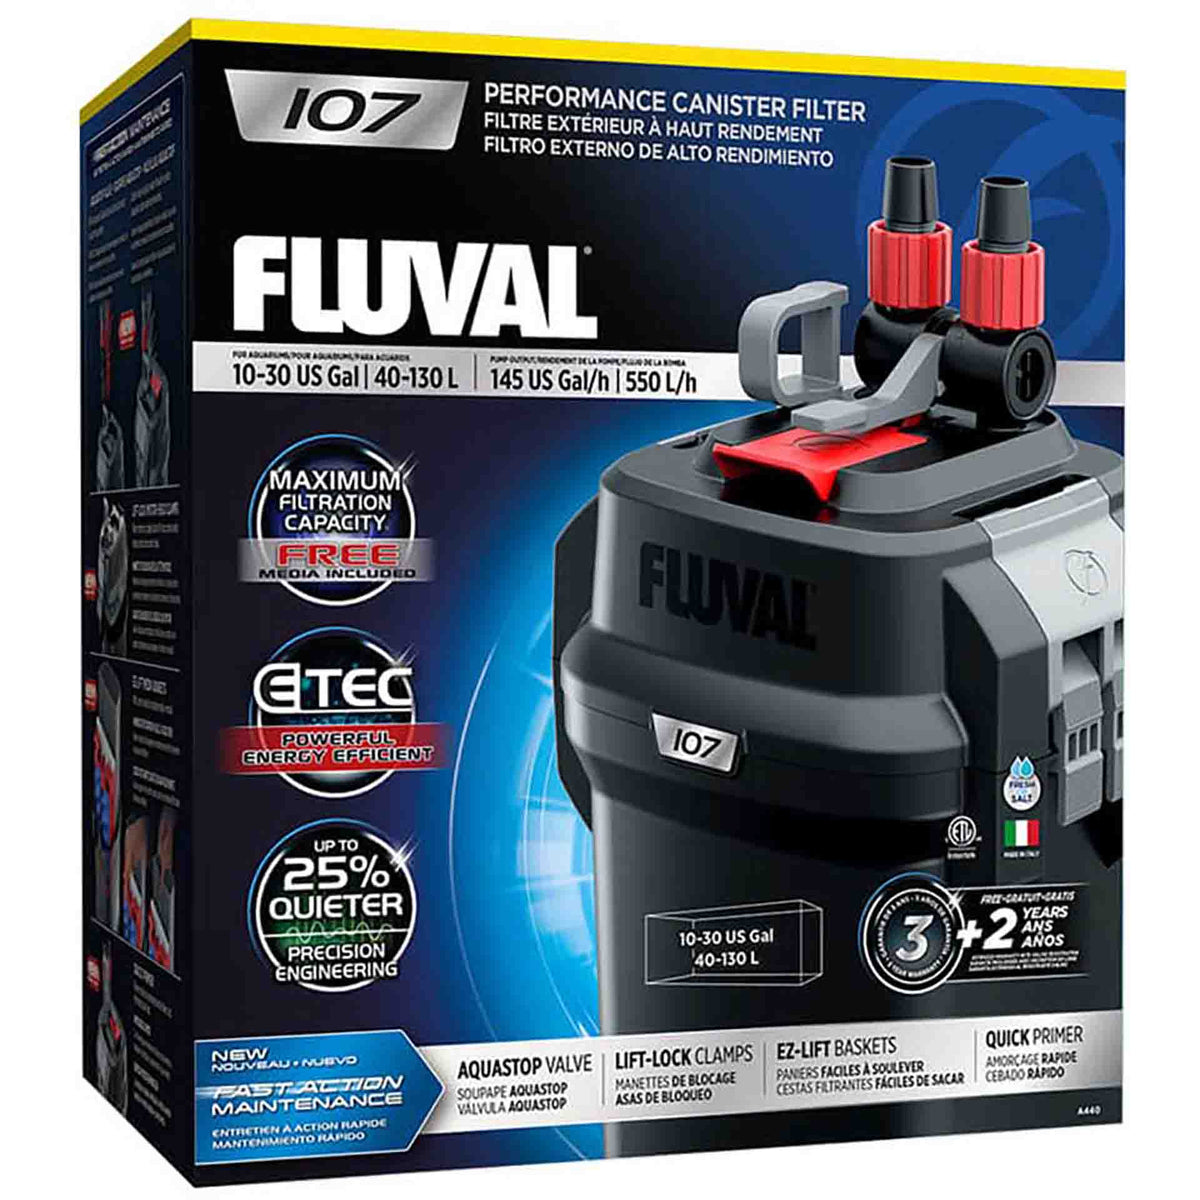 Fluval 107 Performance Canister Filter, up to 130 L Aquarium